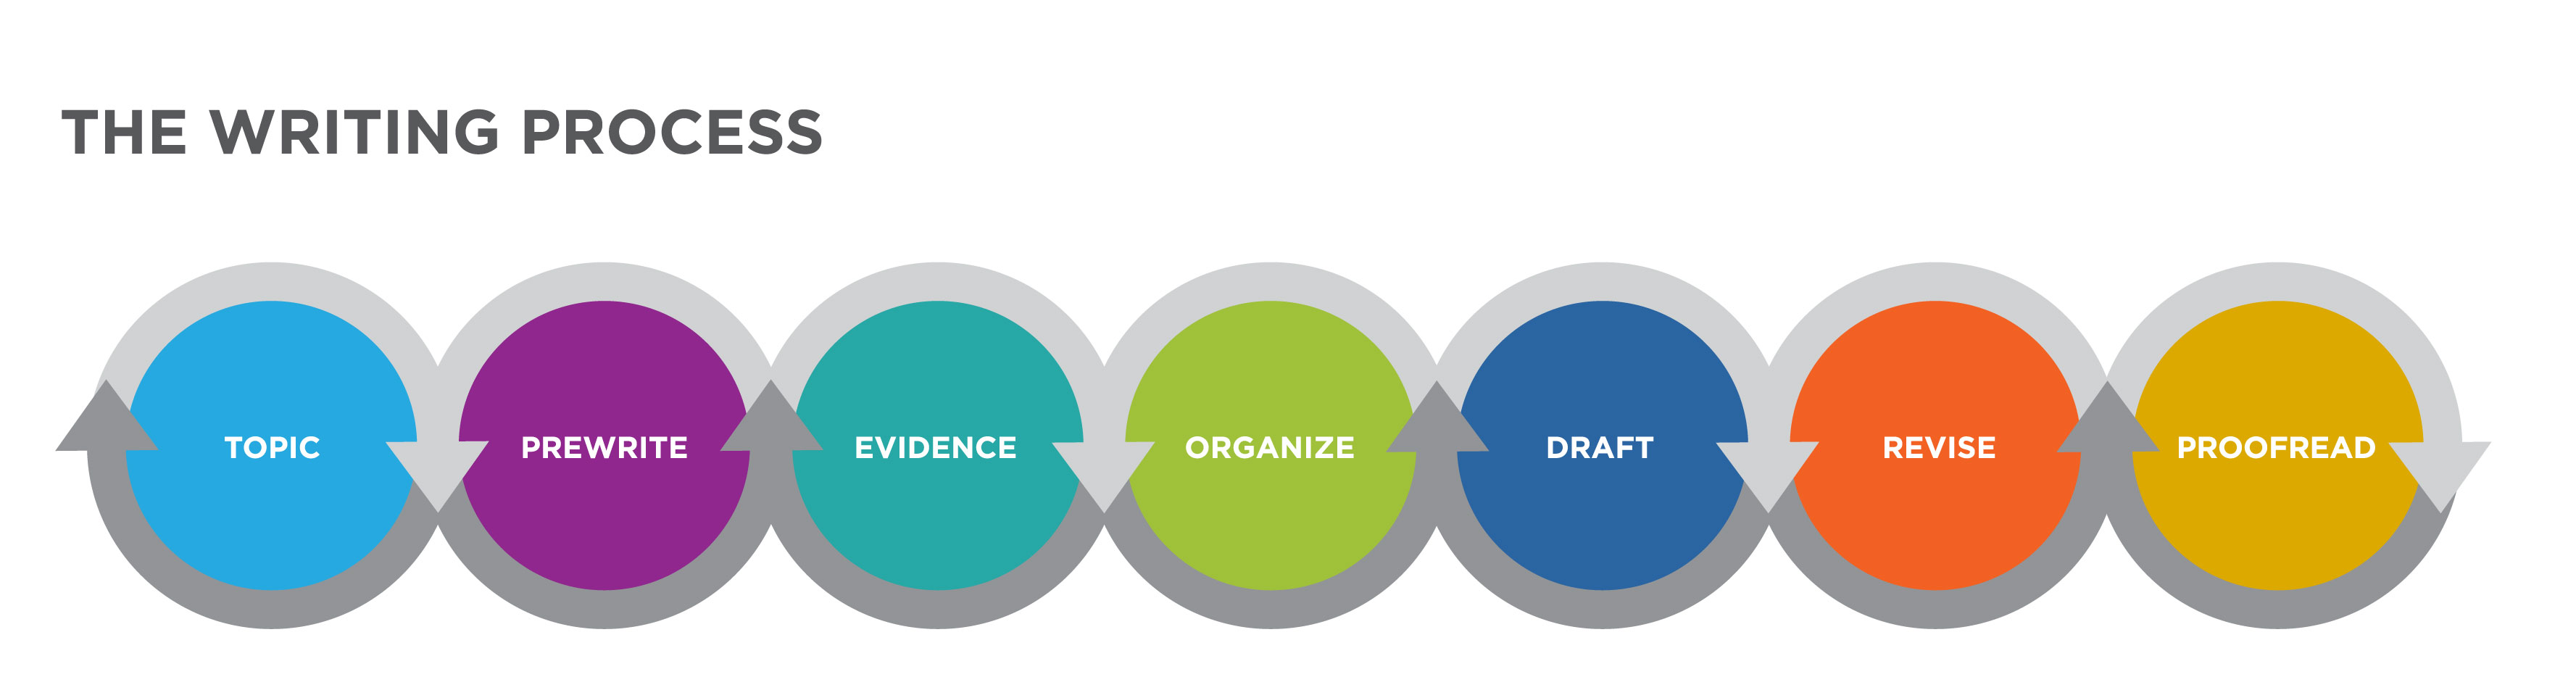 Graphic labeled "The Writing Process." A line of brightly colored circles are connected by gray arrows wrapping around them. From left to right, they read: Topic, Prewrite, Evidence, Organize, Draft, Revise, Proofread.